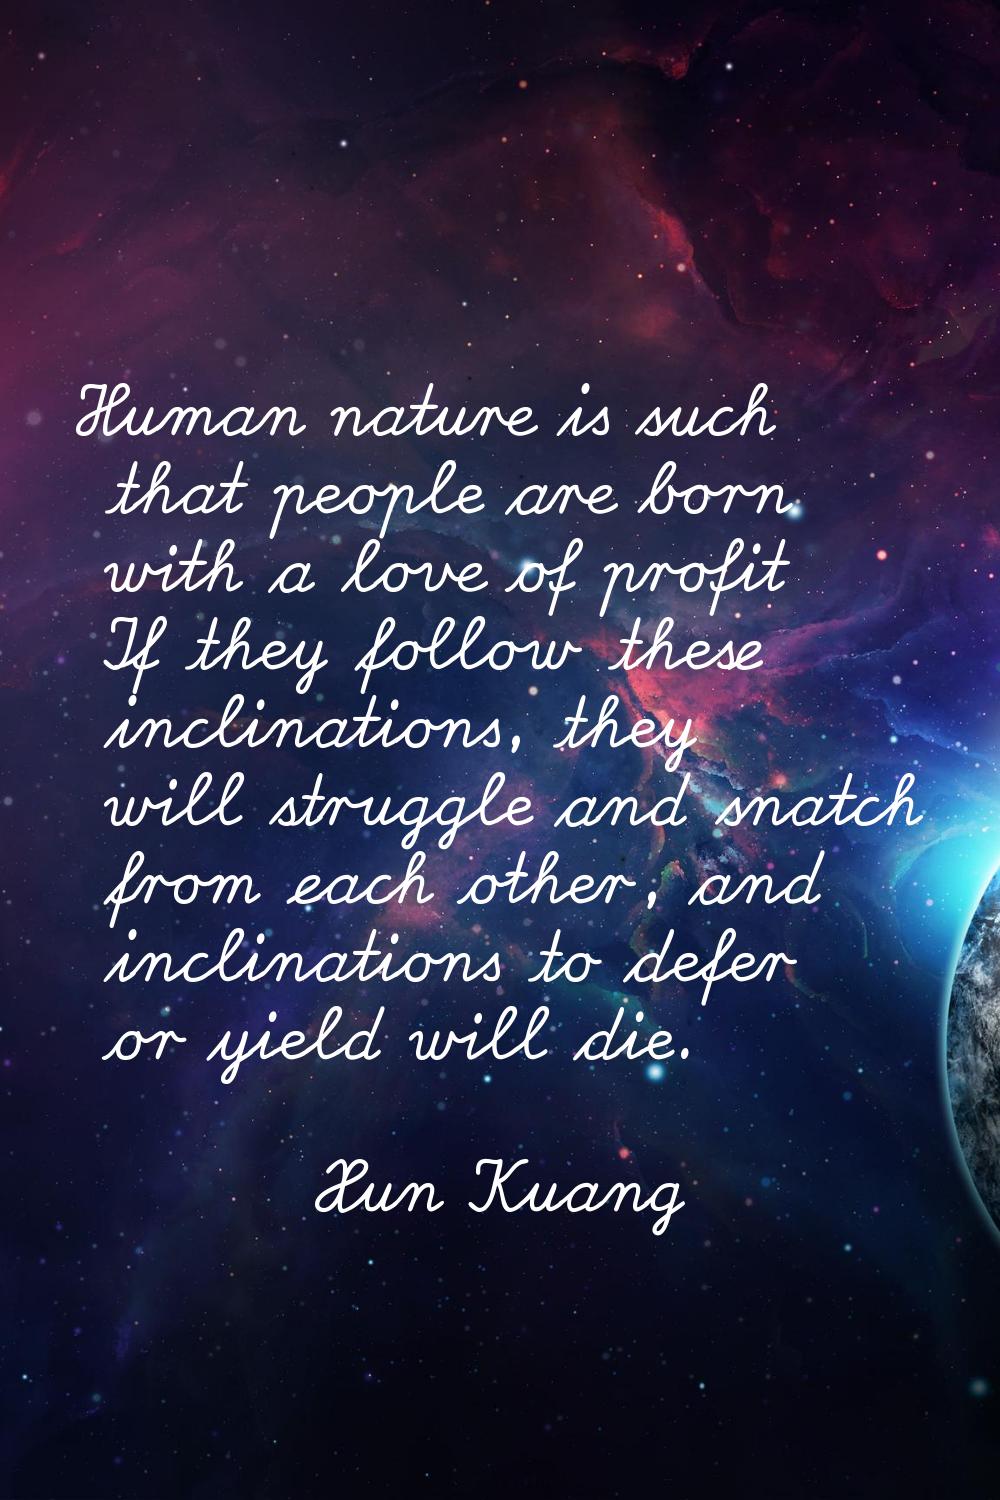 Human nature is such that people are born with a love of profit If they follow these inclinations, 